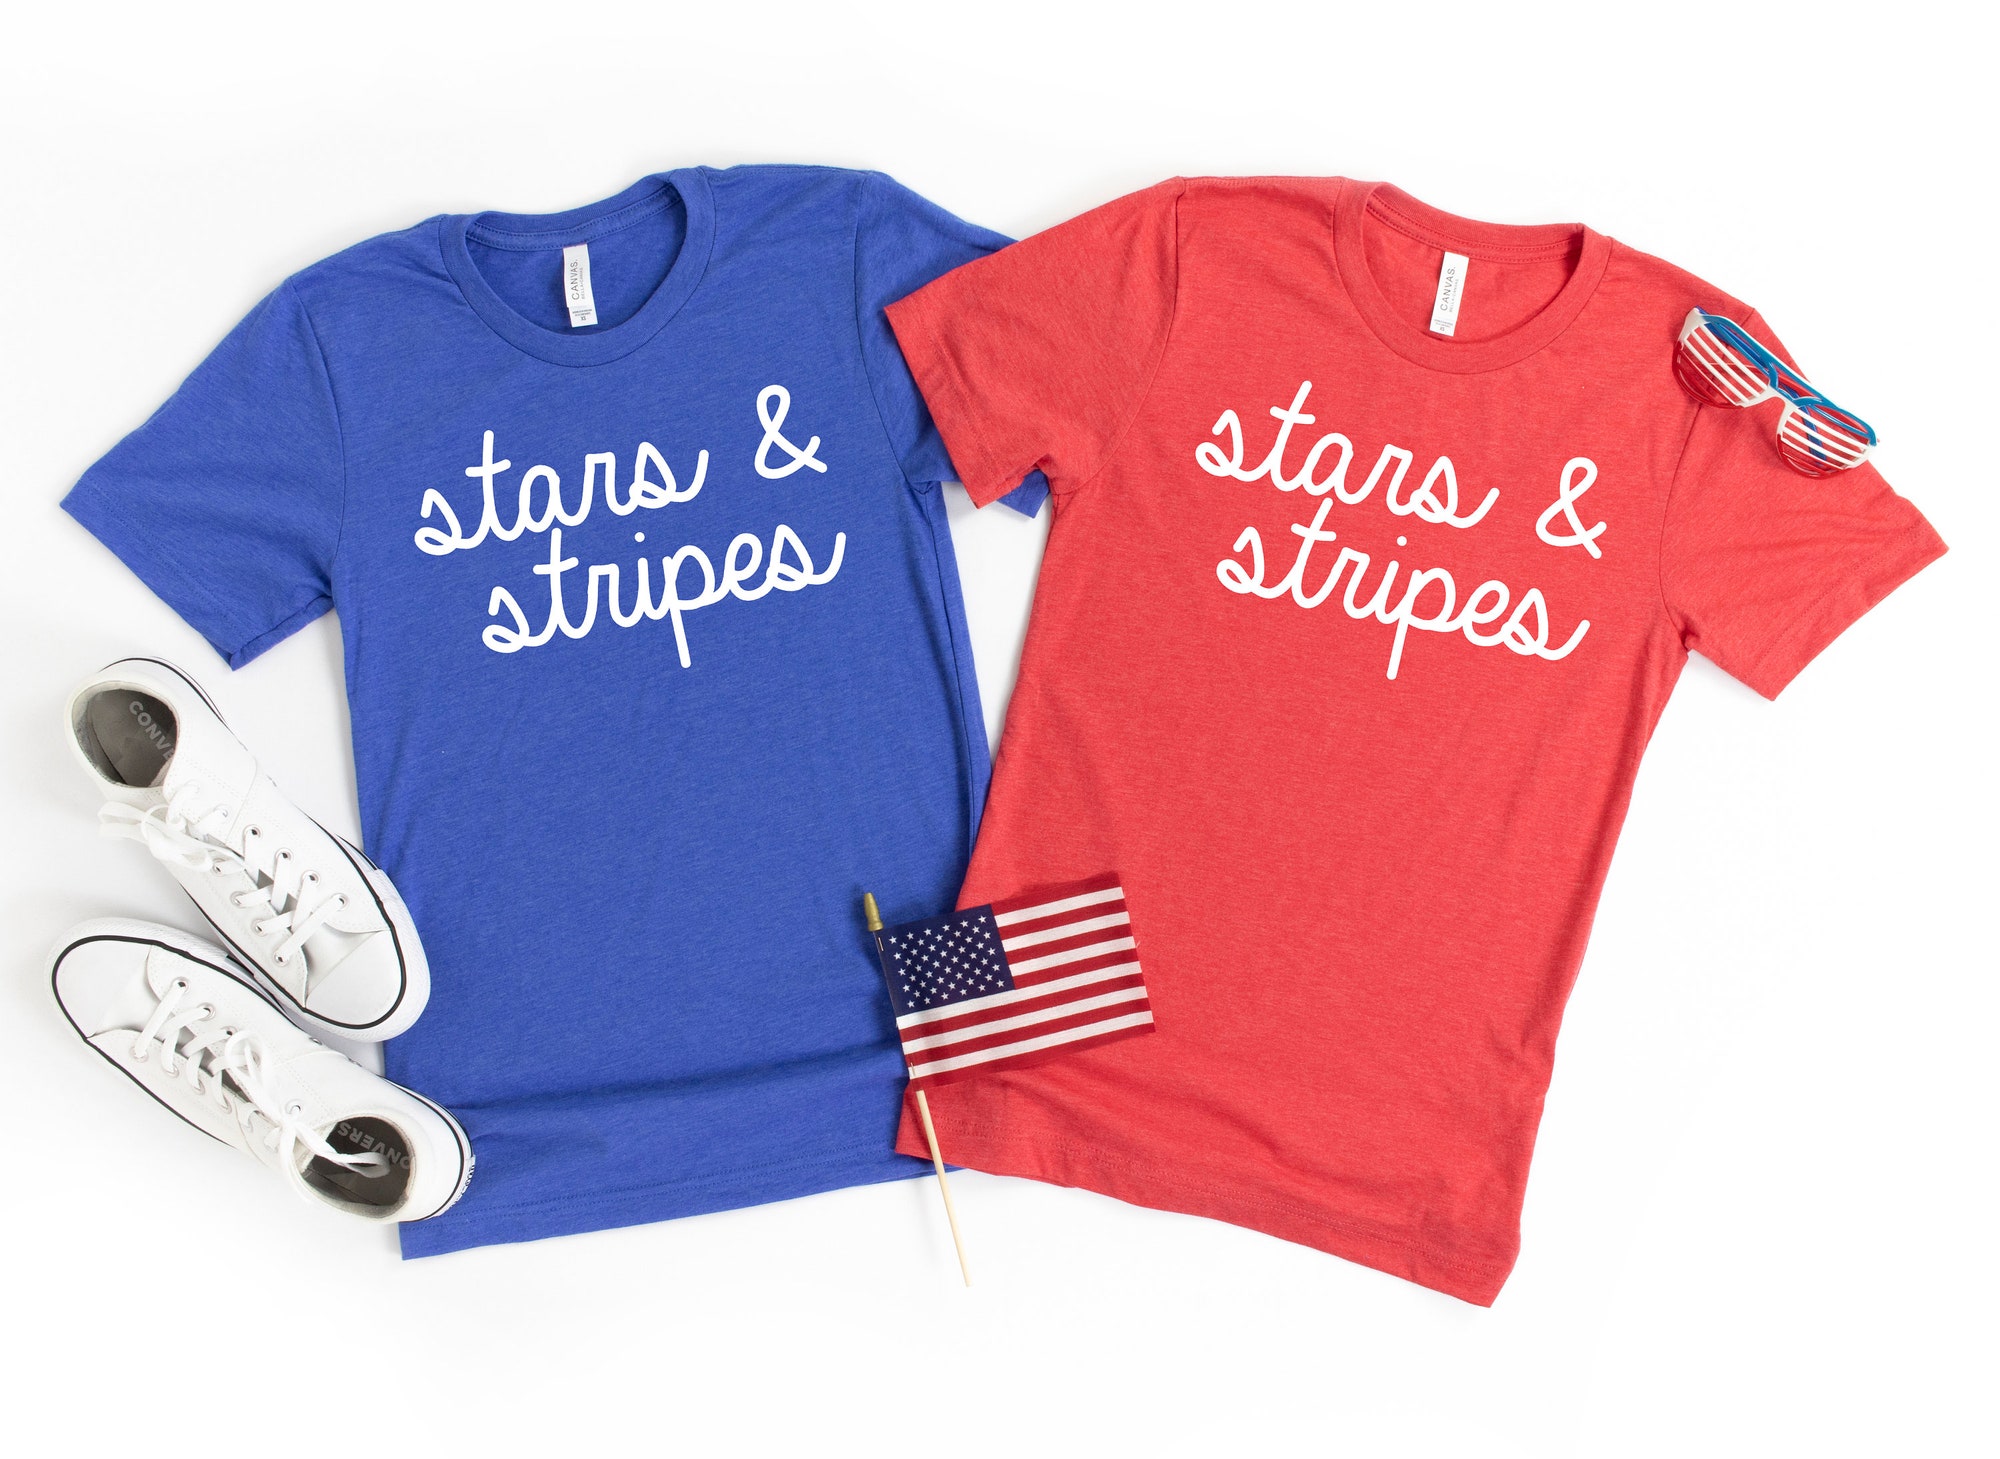 Discover Patriotic 4th of July Shirt, Womens Tee, Merica, Stars and Stripes TShirt, 4th of July Graphic Tee